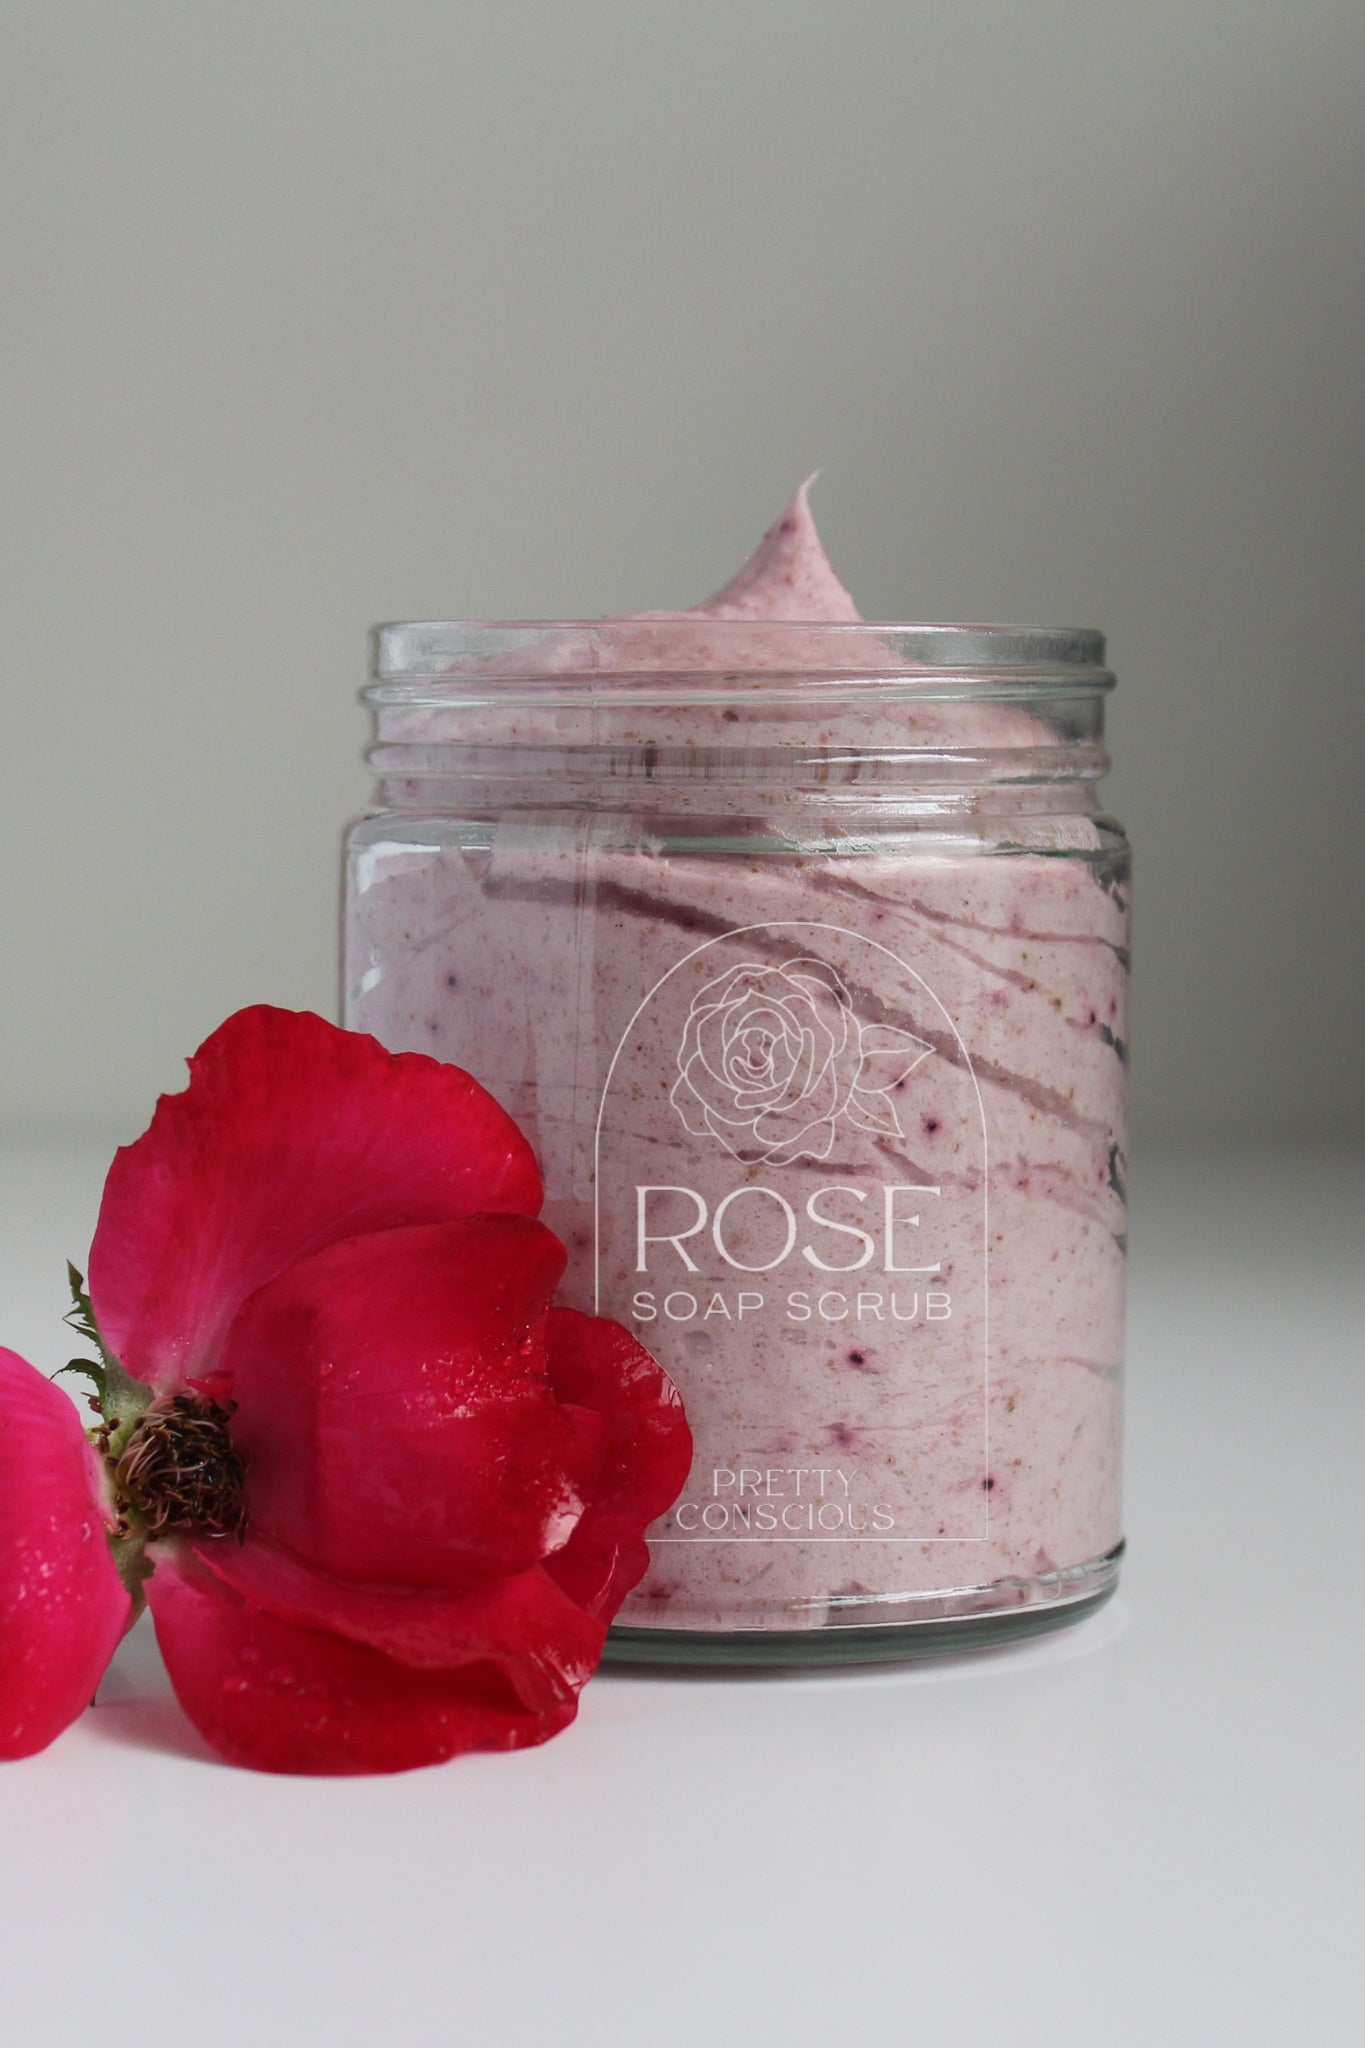 Pretty conscious beauty rose whipped soap scrub